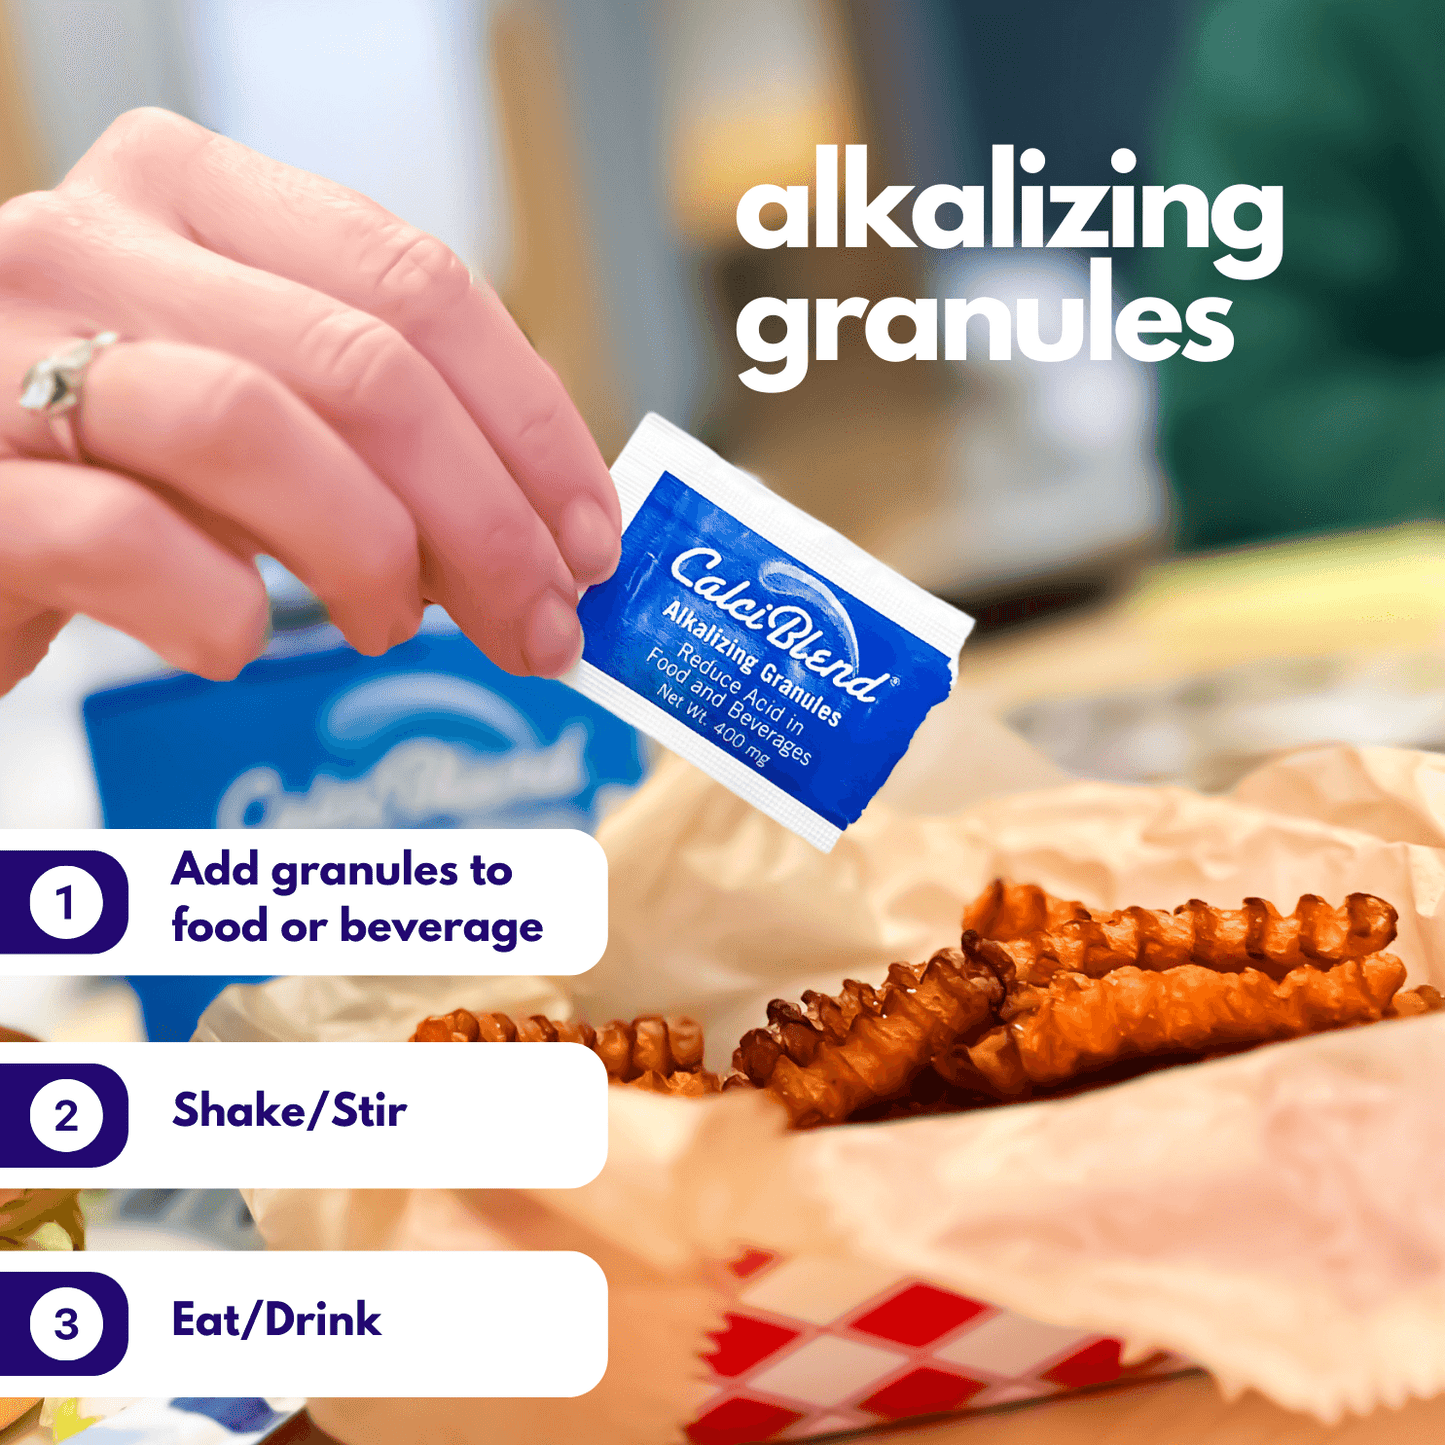 CalciBlend Alkalizing Granules How to Use - Shake Directly on Food